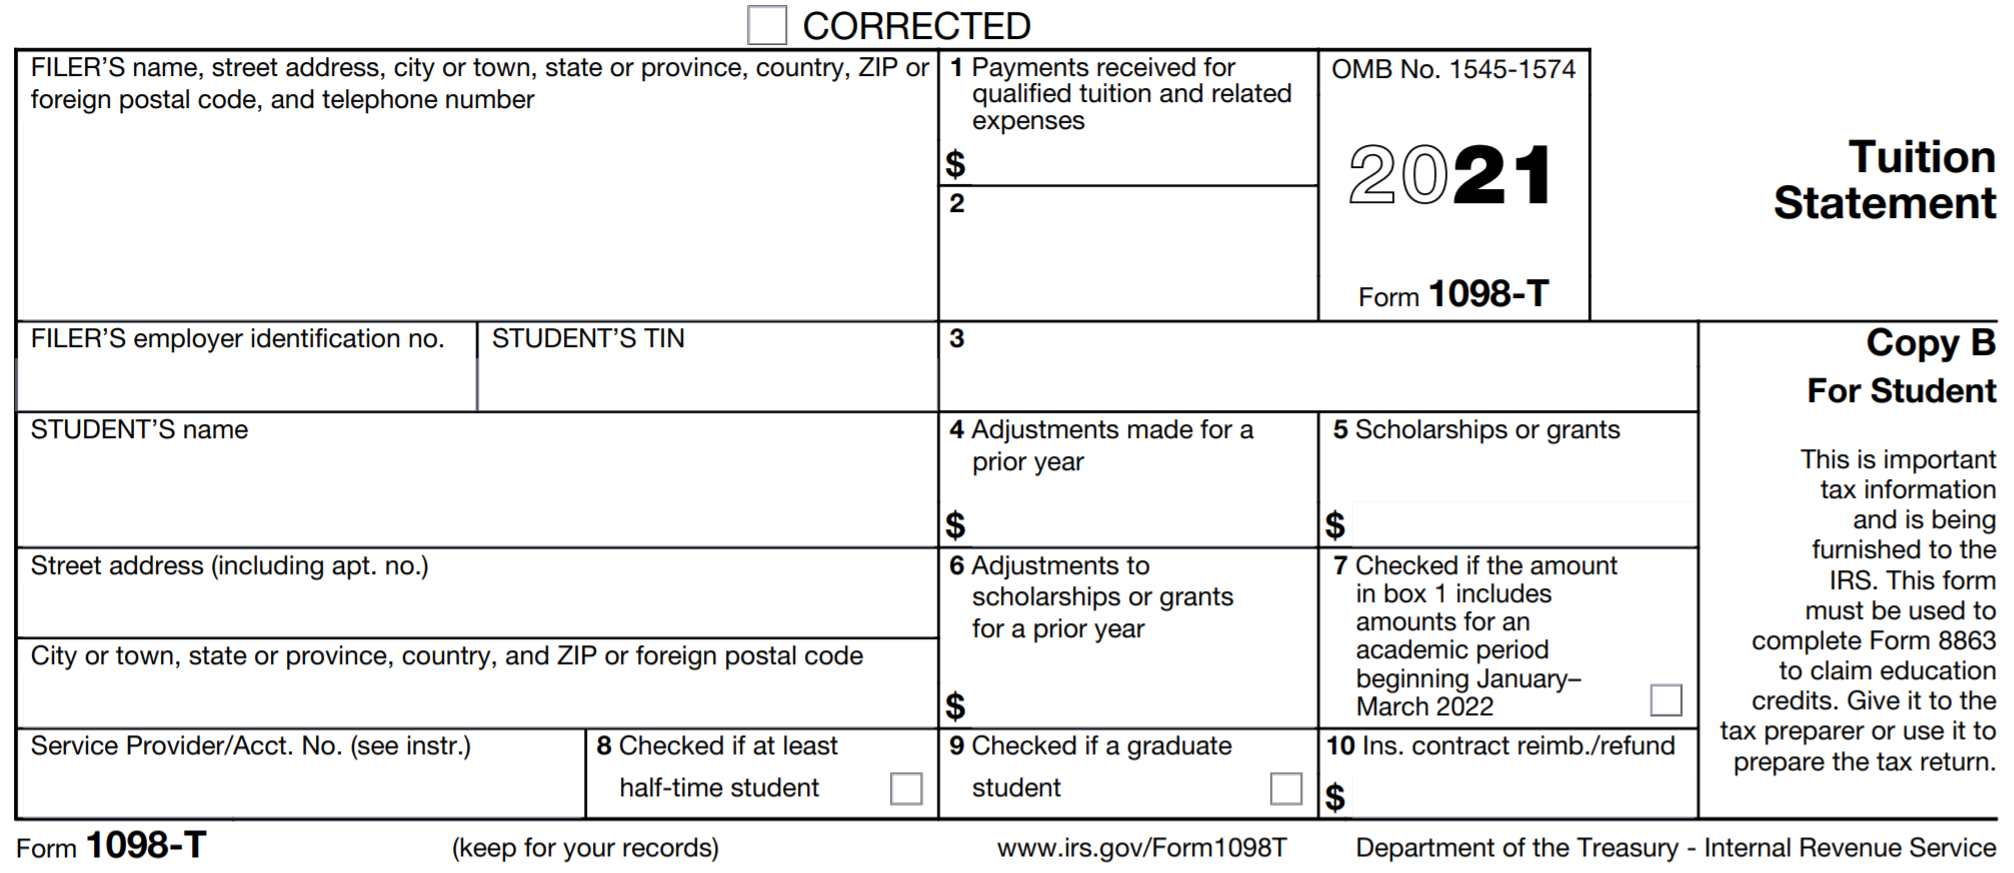 Education Credits and Deductions (Form 1098T) Support